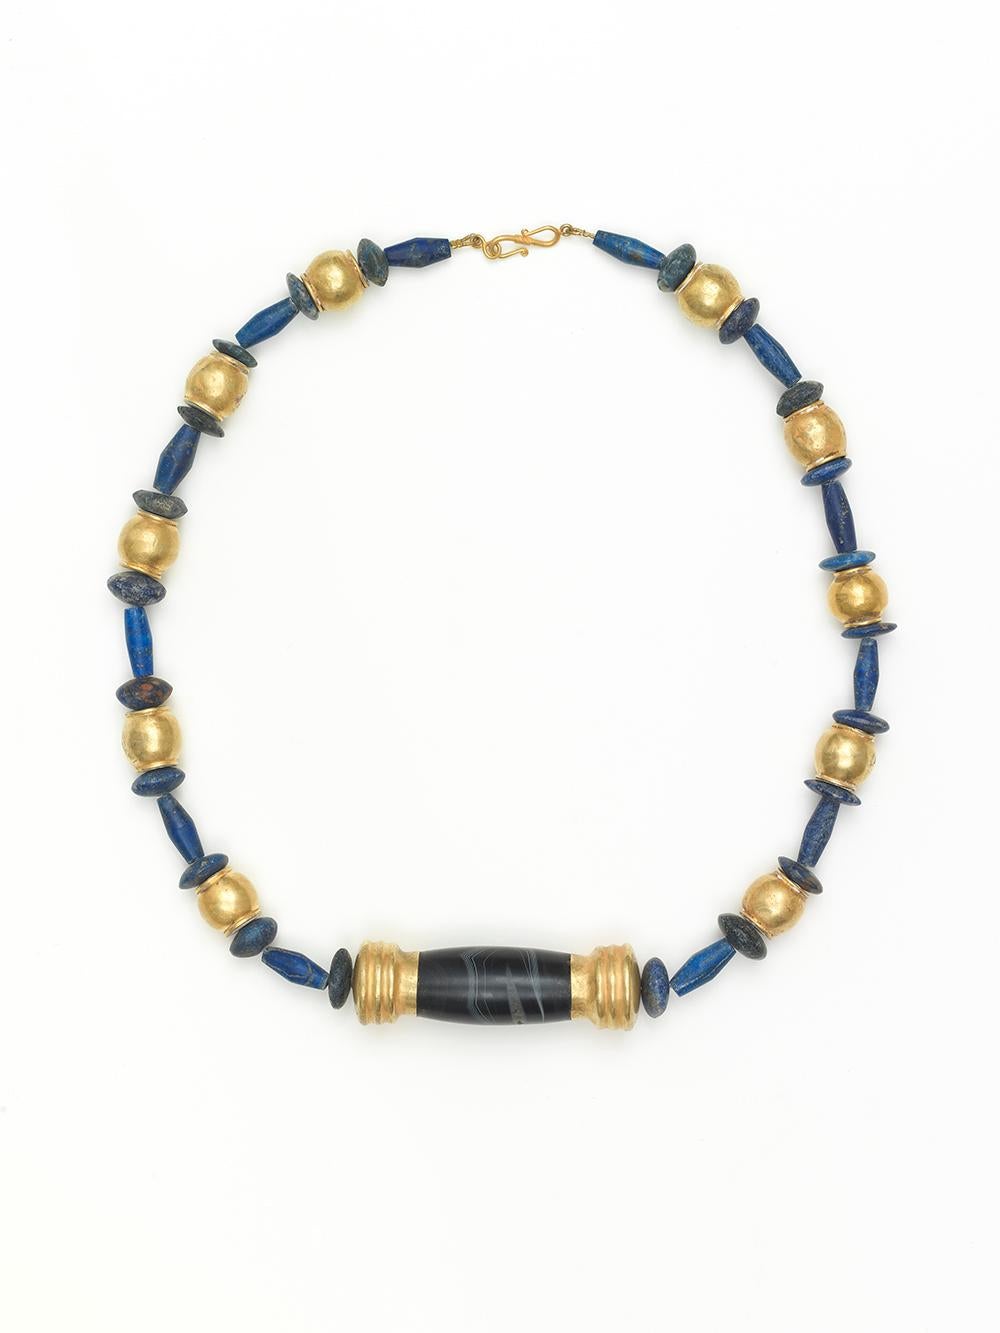 Bactrian culture spread across a wide area of modern-day Afghanistan and Uzbekistan and reached its zenith between 2100 and 1700 B.C. It produced many unique and distinctive objects and jewellery. 

A stunning beaded necklace comprising of both